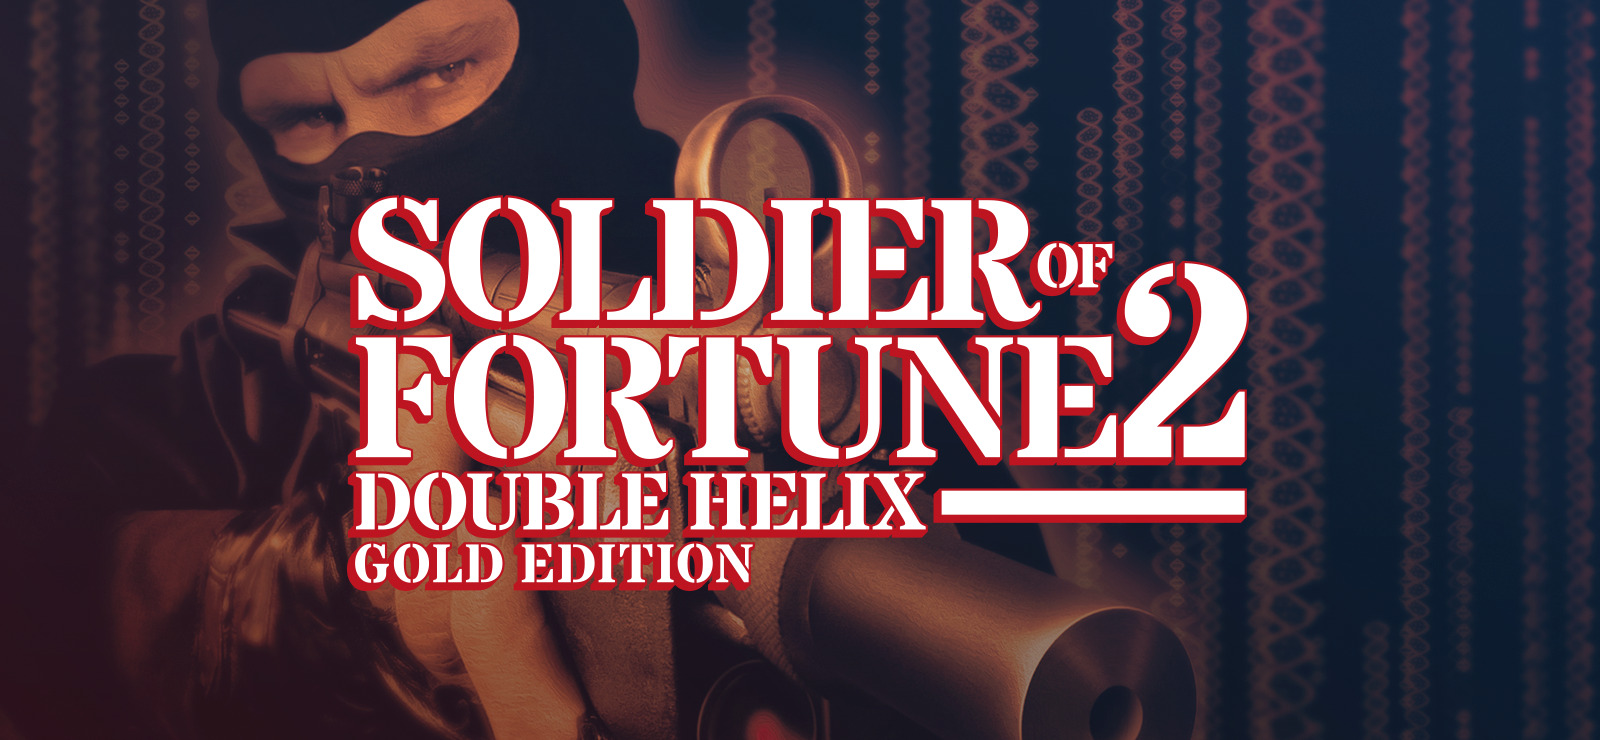 download soldier of fortune 2 double helix